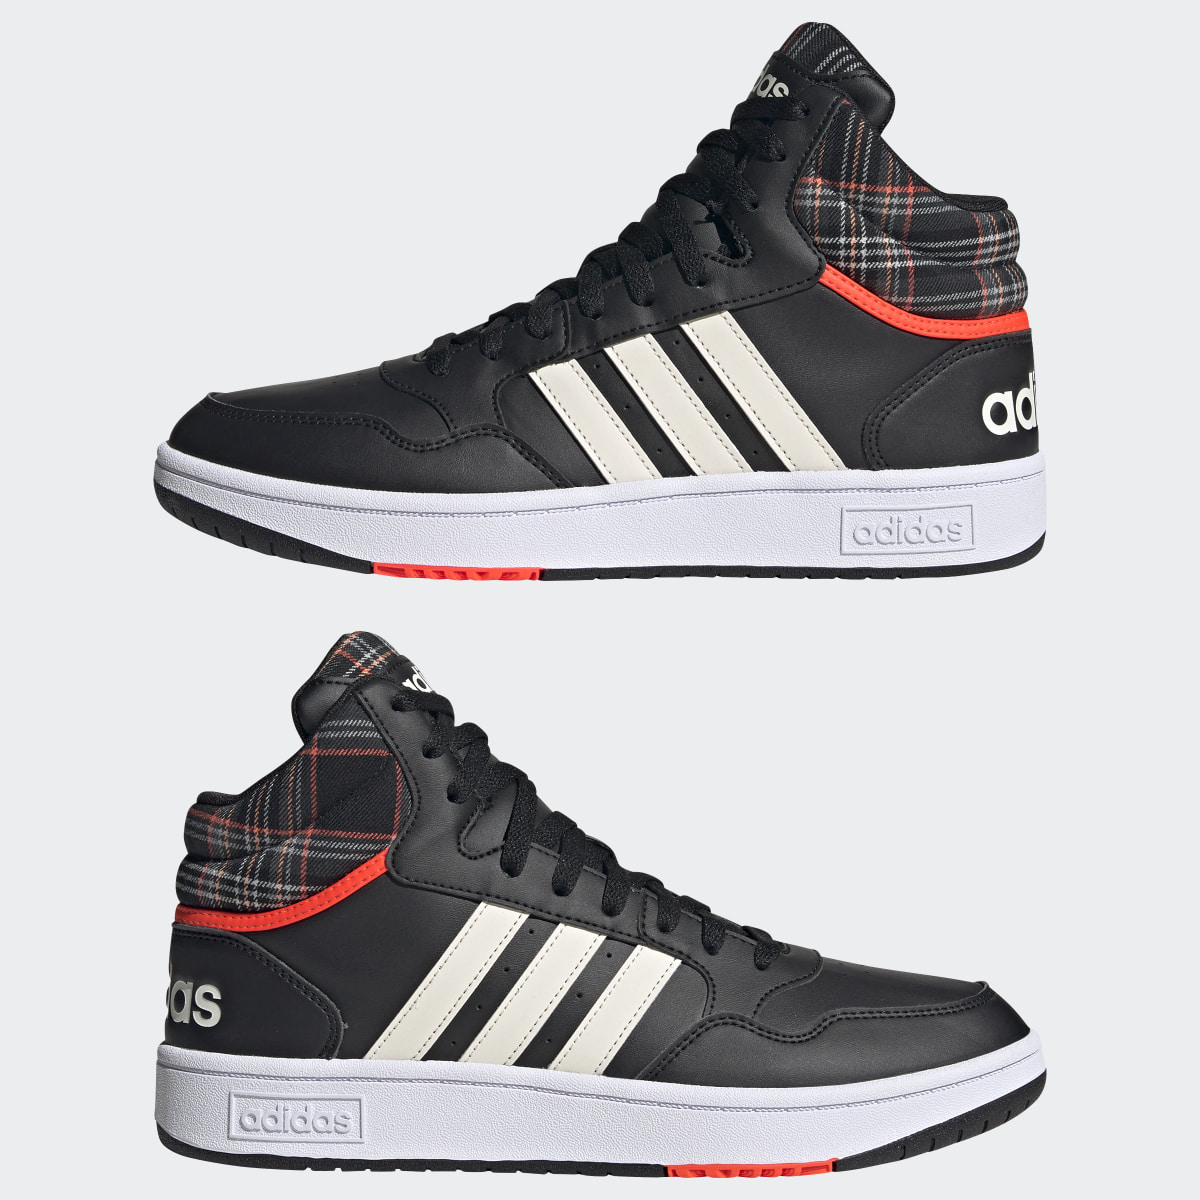 Adidas Hoops 3.0 Mid Lifestyle Basketball Classic Vintage Shoes. 8